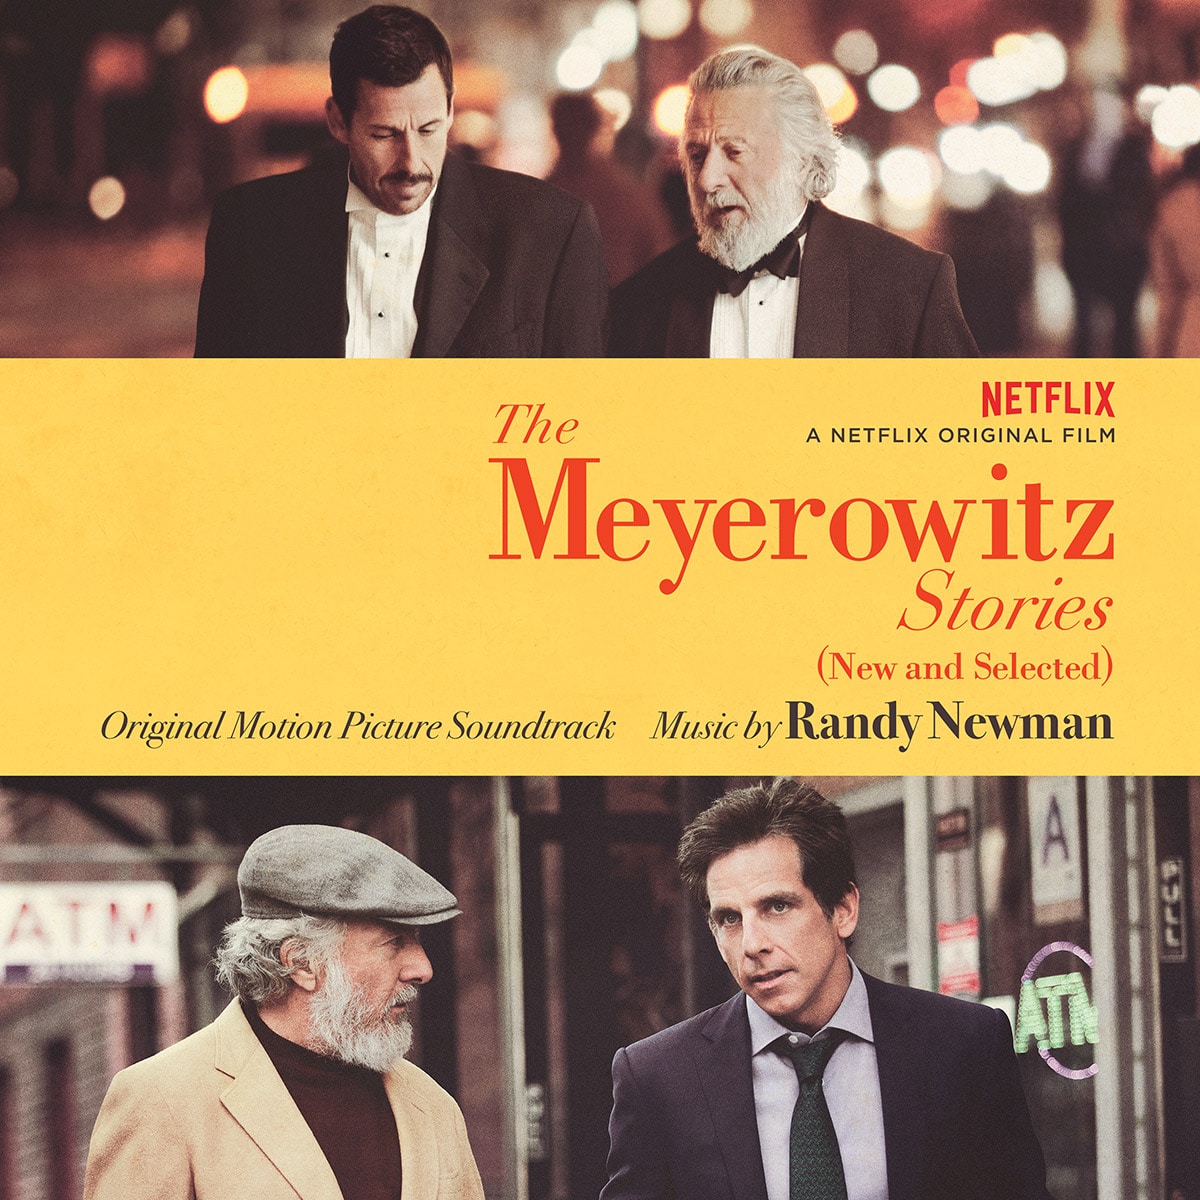 Randy Newman – The Meyerowitz Stories (New and Selected) (2017)